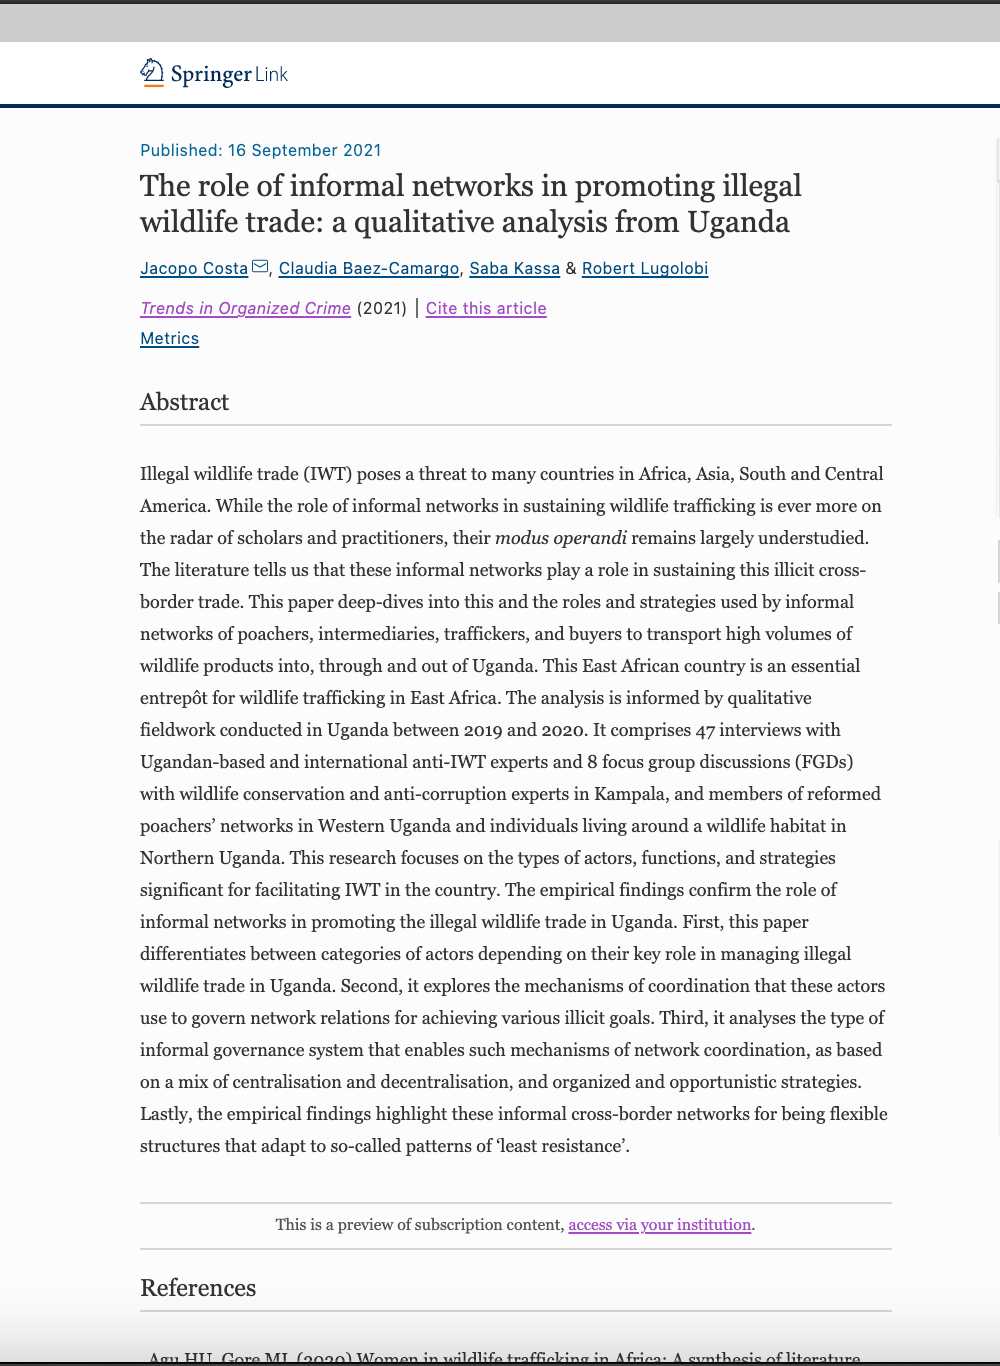 The role of informal networks in promoting illegal wildlife trade: a qualitative analysis from Uganda